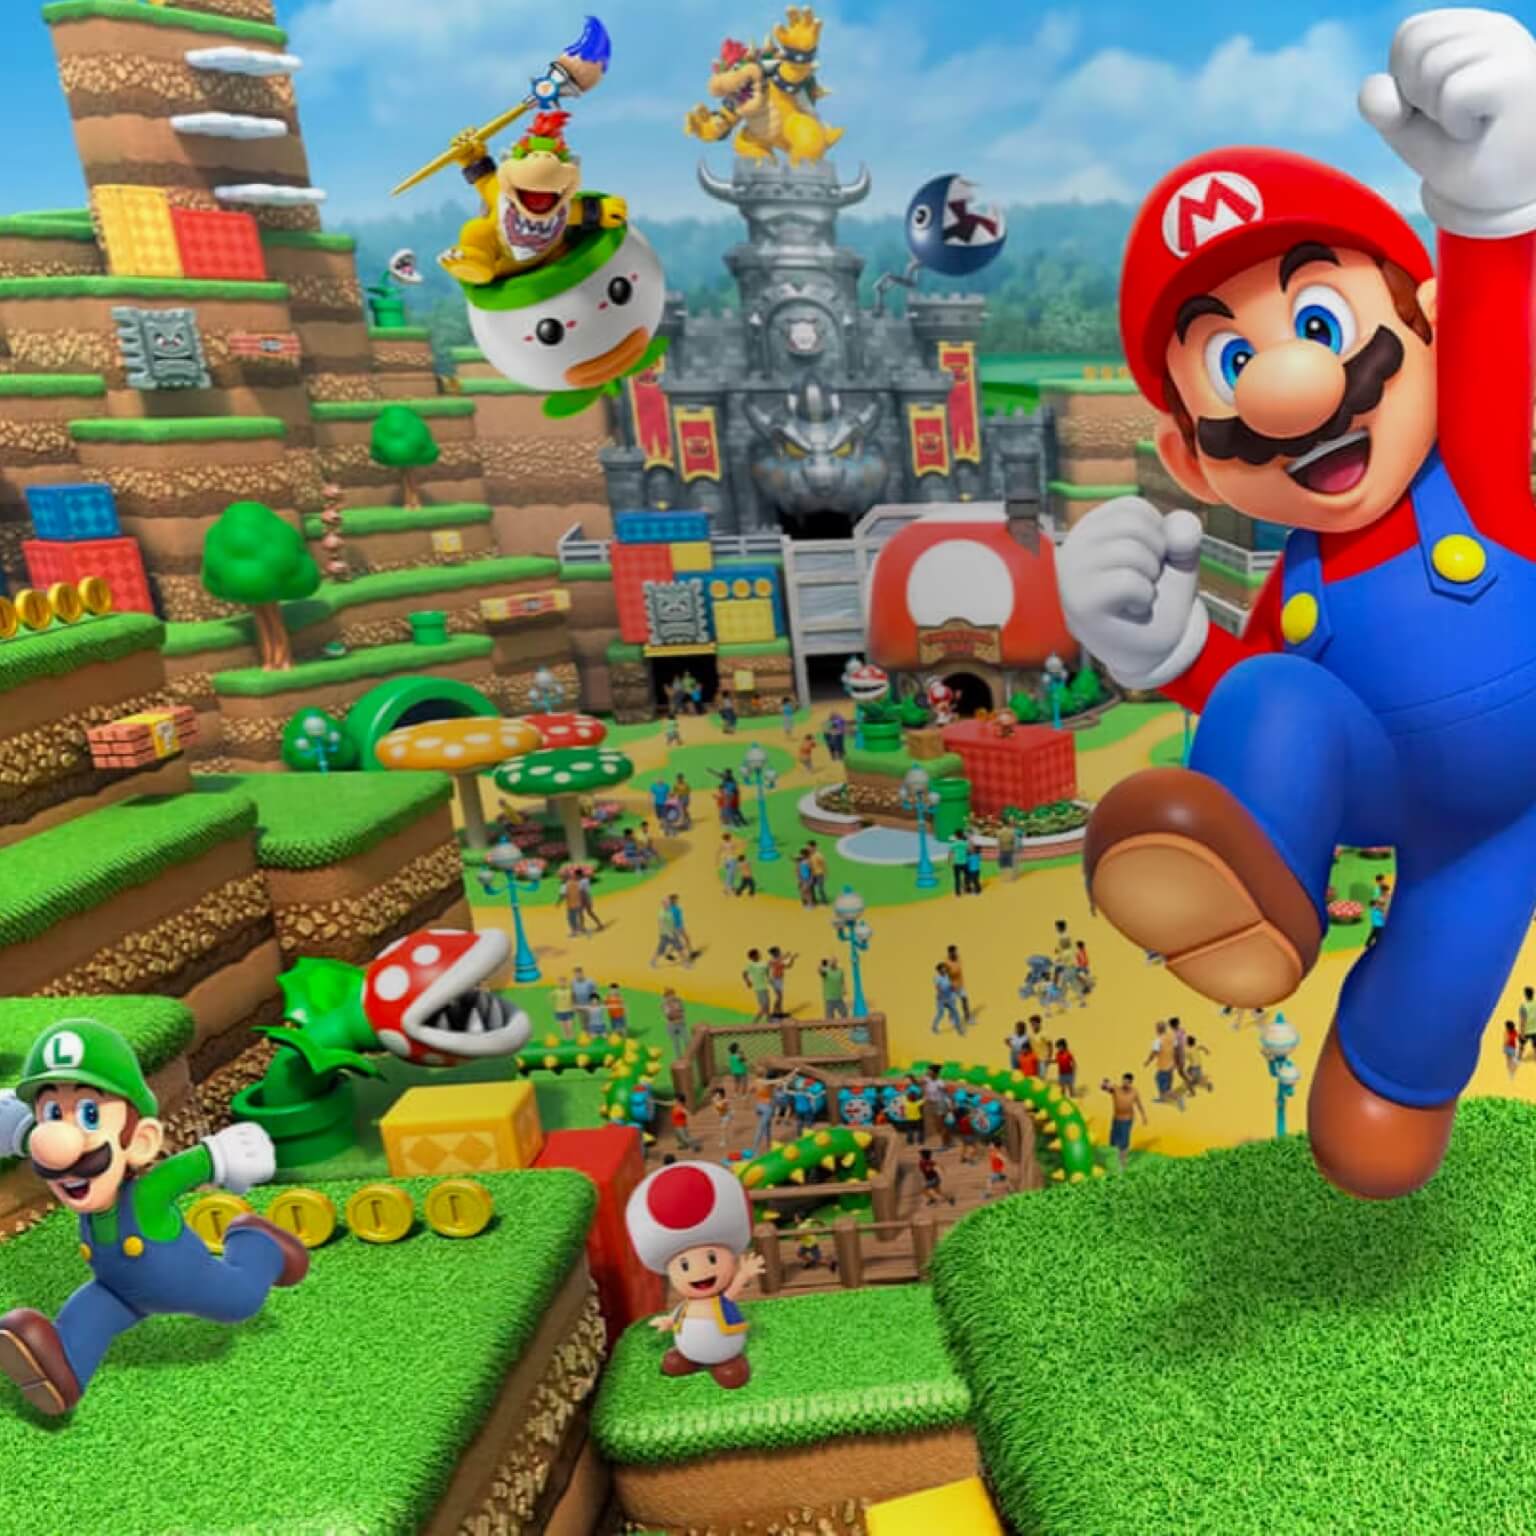 The video game character Mario jumps up, raising his fist in the air high above an illustration of SUPER NINTENDO WORLD™. Bowser's Castle and Princess Peach's Castle are visible in the background, along with a multitude of other video game characters racing about and flying through the sky.